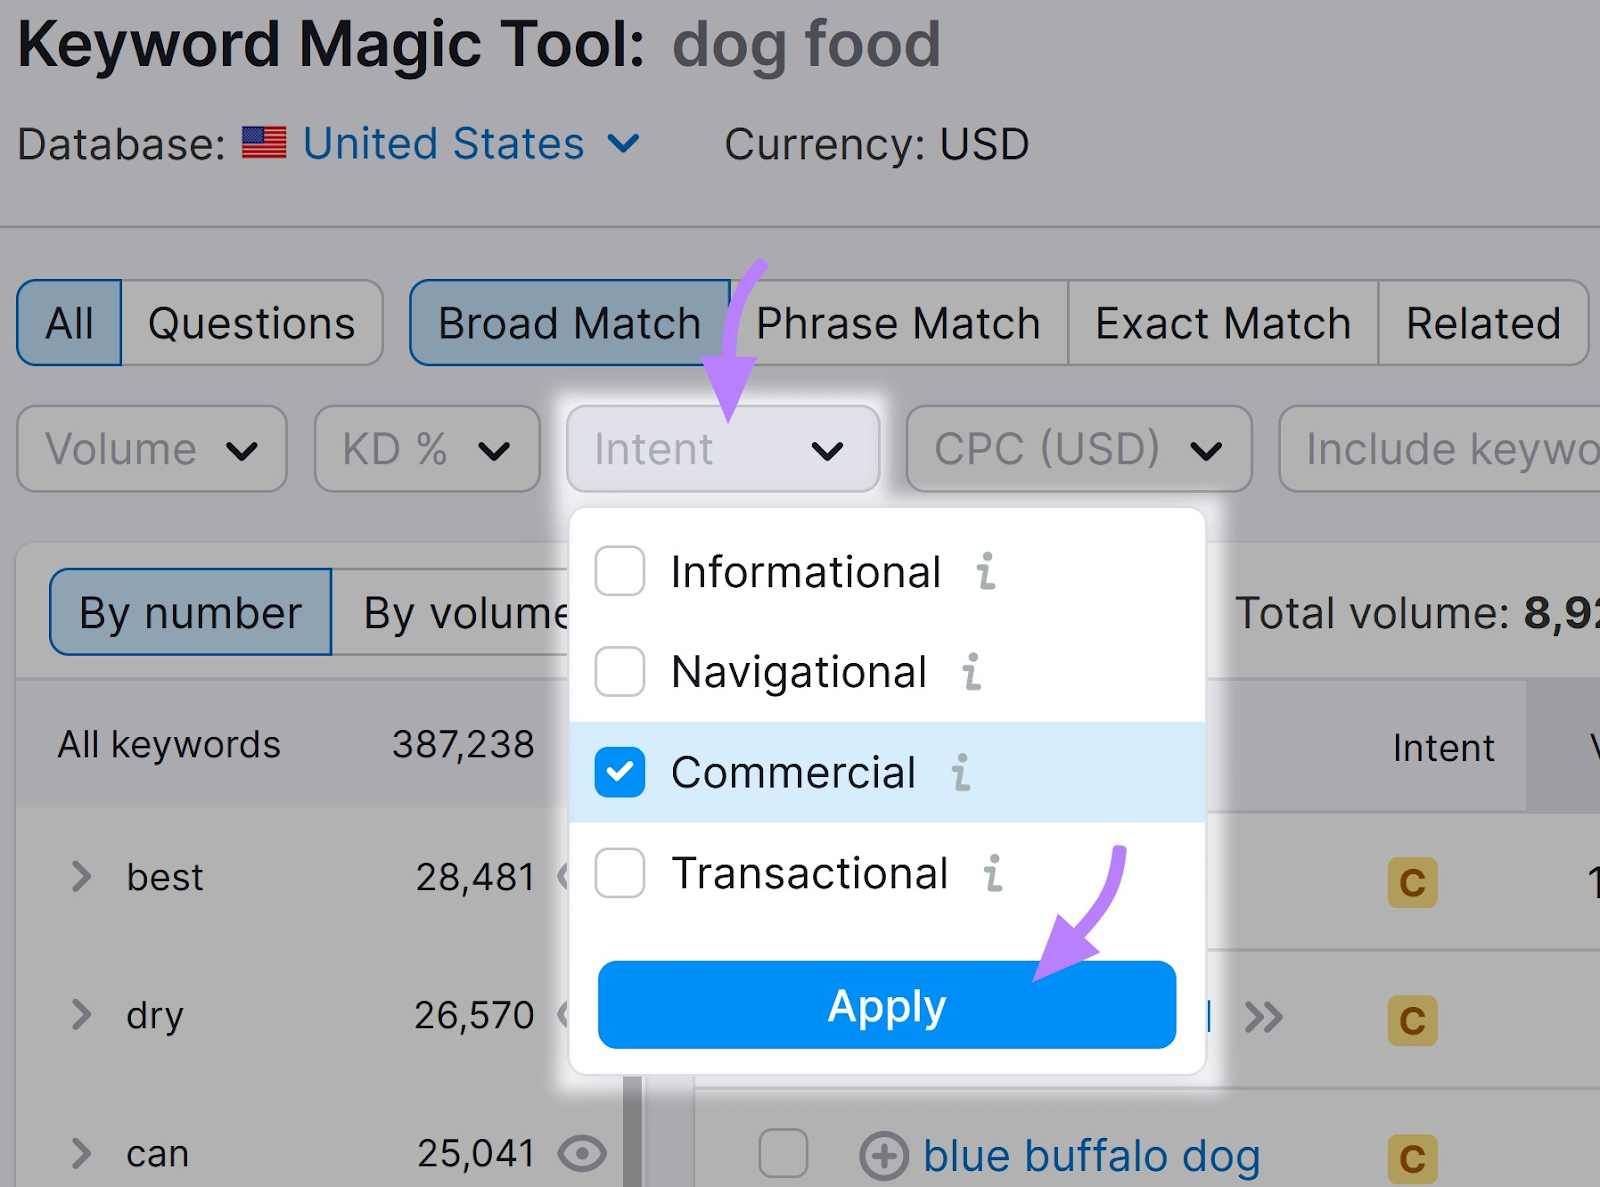 filetring keywords with “Commercial” search intent in Keyword Magic Tool